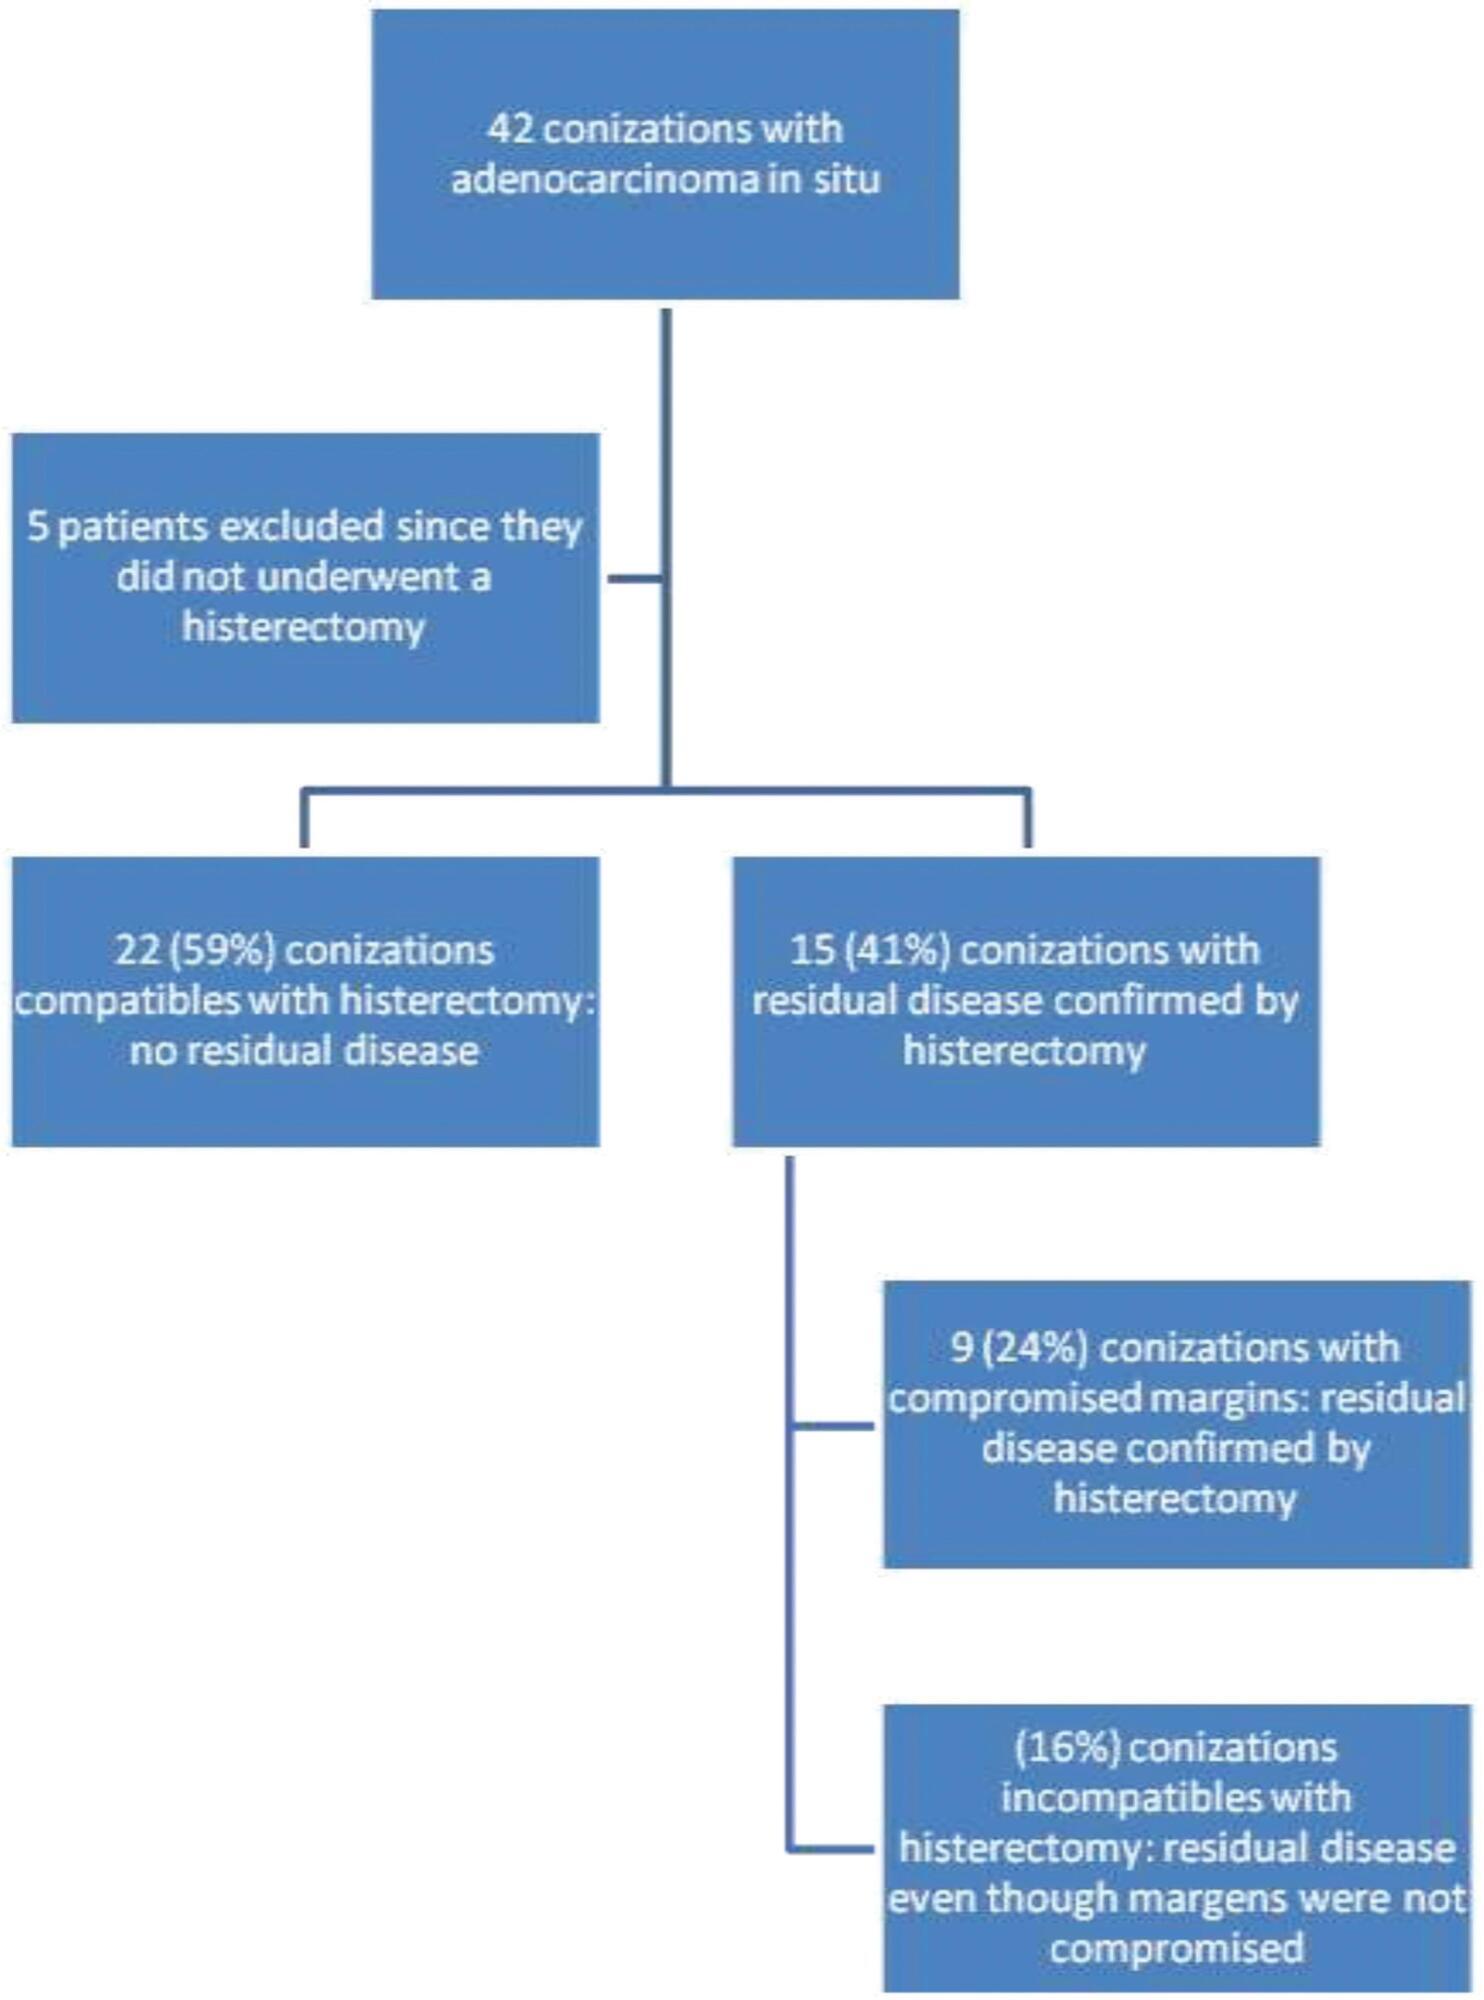 Analysis of Conization Results in Patients undergoing Hysterectomy for Uterine Adenocarcinoma